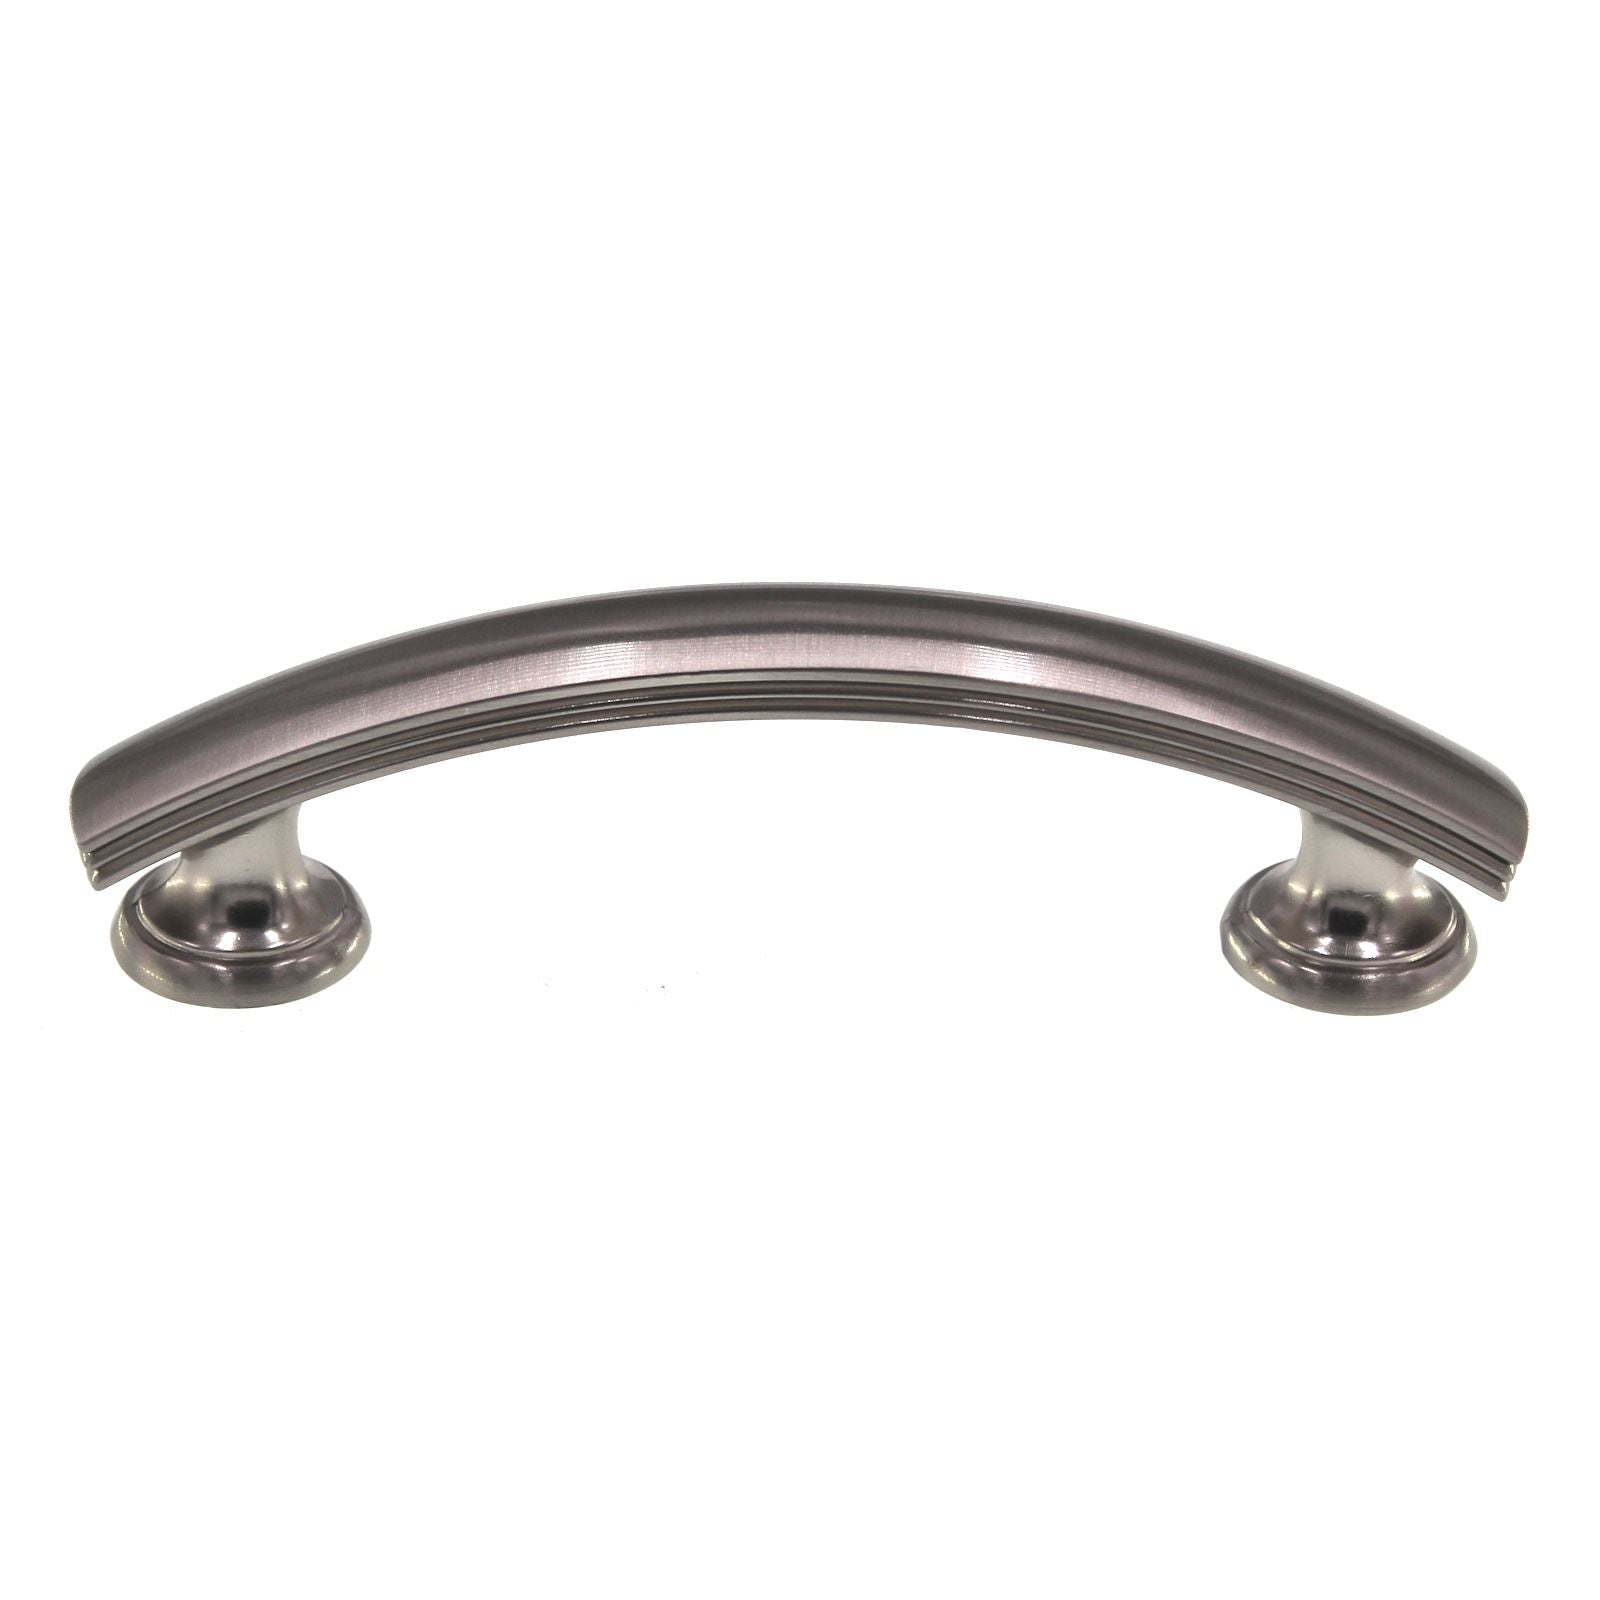 Hickory Hardware American Diner 3" Ctr Cabinet Pull Stainless Steel P2143-SS